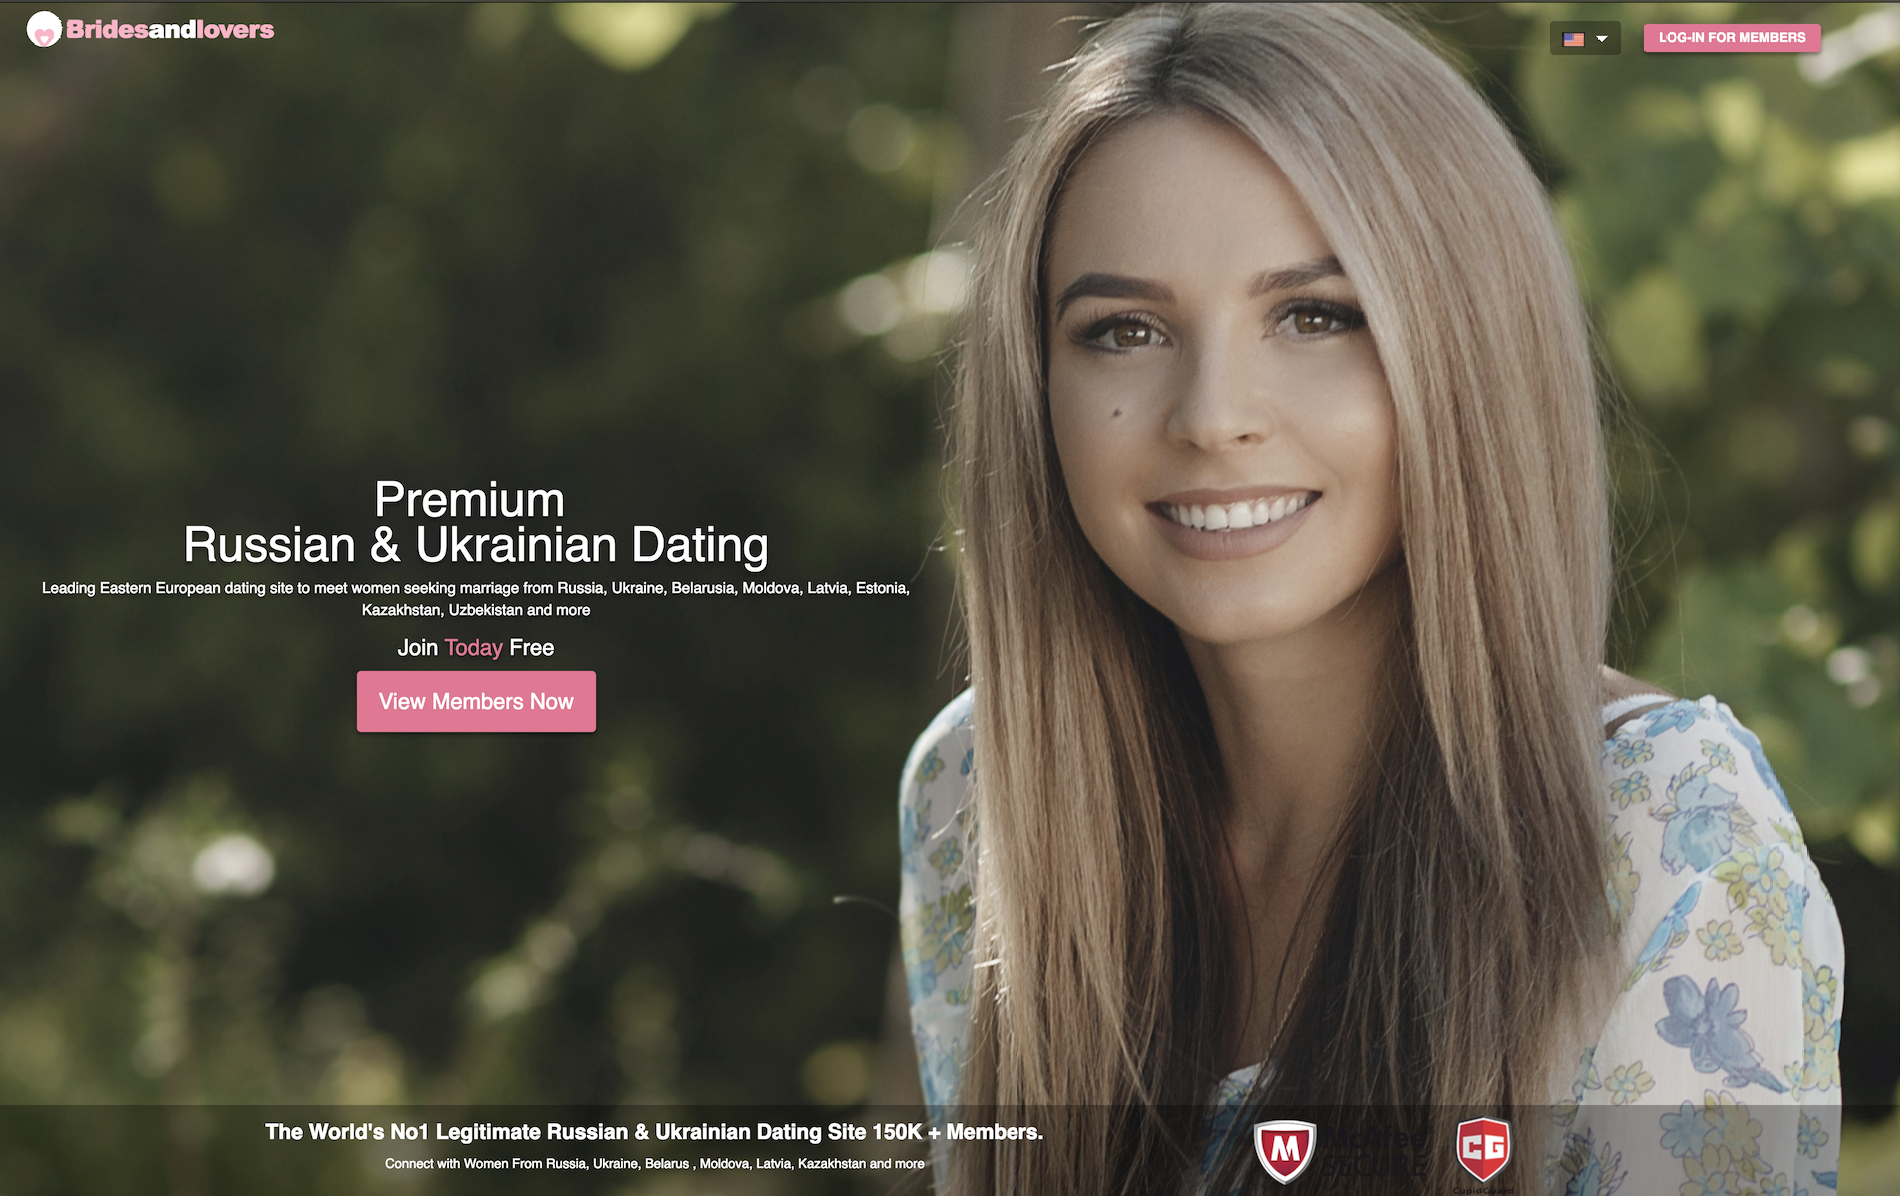 Diary of an online dating scam: Man seduced by 'Aleksandra' goes public to warn others